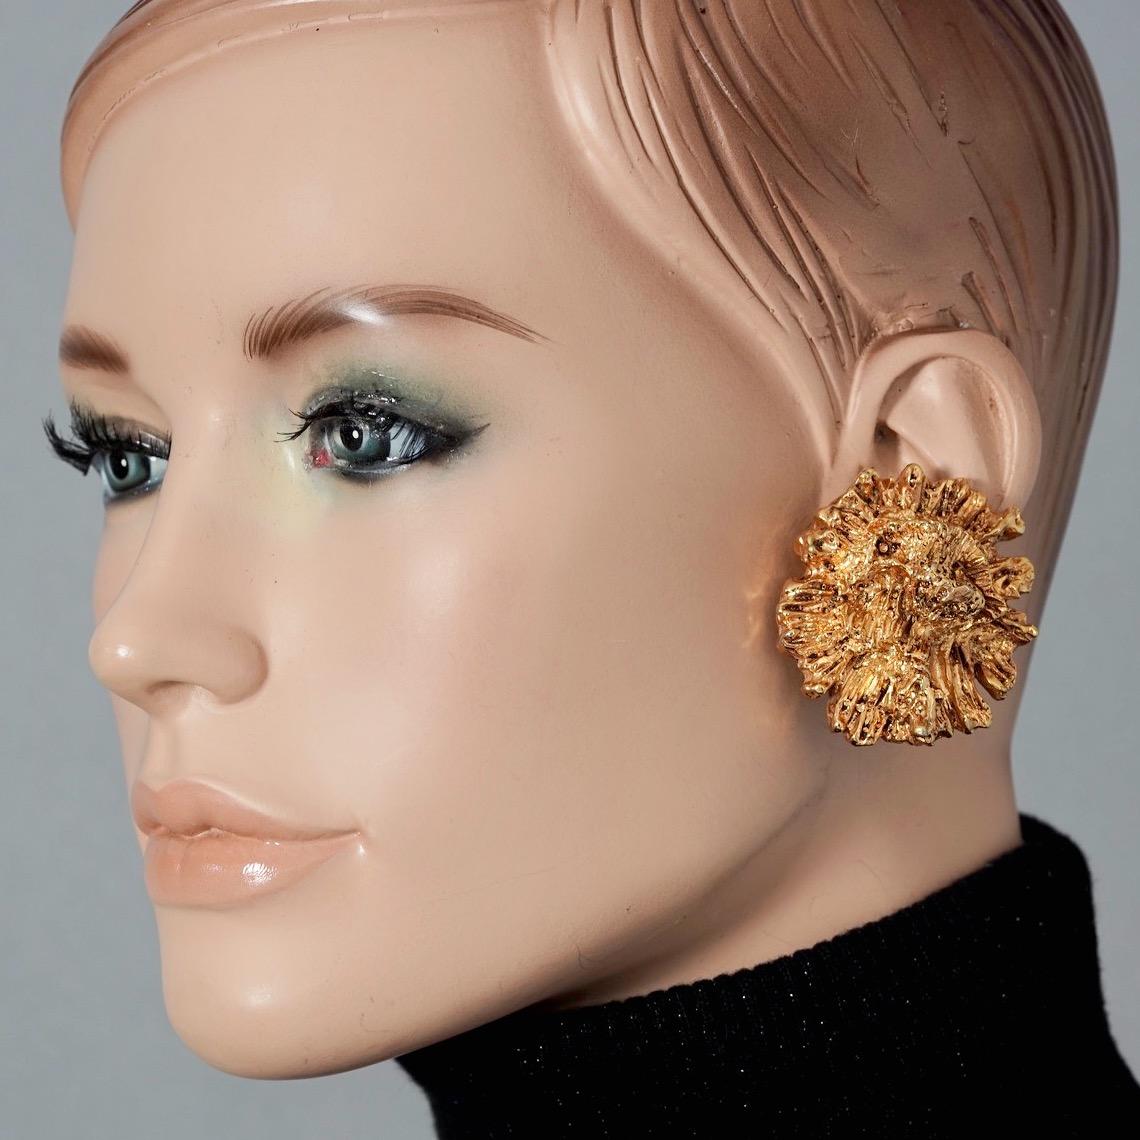 Vintage Massive GEORGES RECH Textured Molten Flower Earrings

Measurement:
Height: 1.85 inches (4.7 cm)
Width: 1.73 inches (4.4 cm)
Weight per Earring: 14 grams

Features:
- 100% Authentic GEORGES RECH.
- Massive textured molten flower earrings.
-